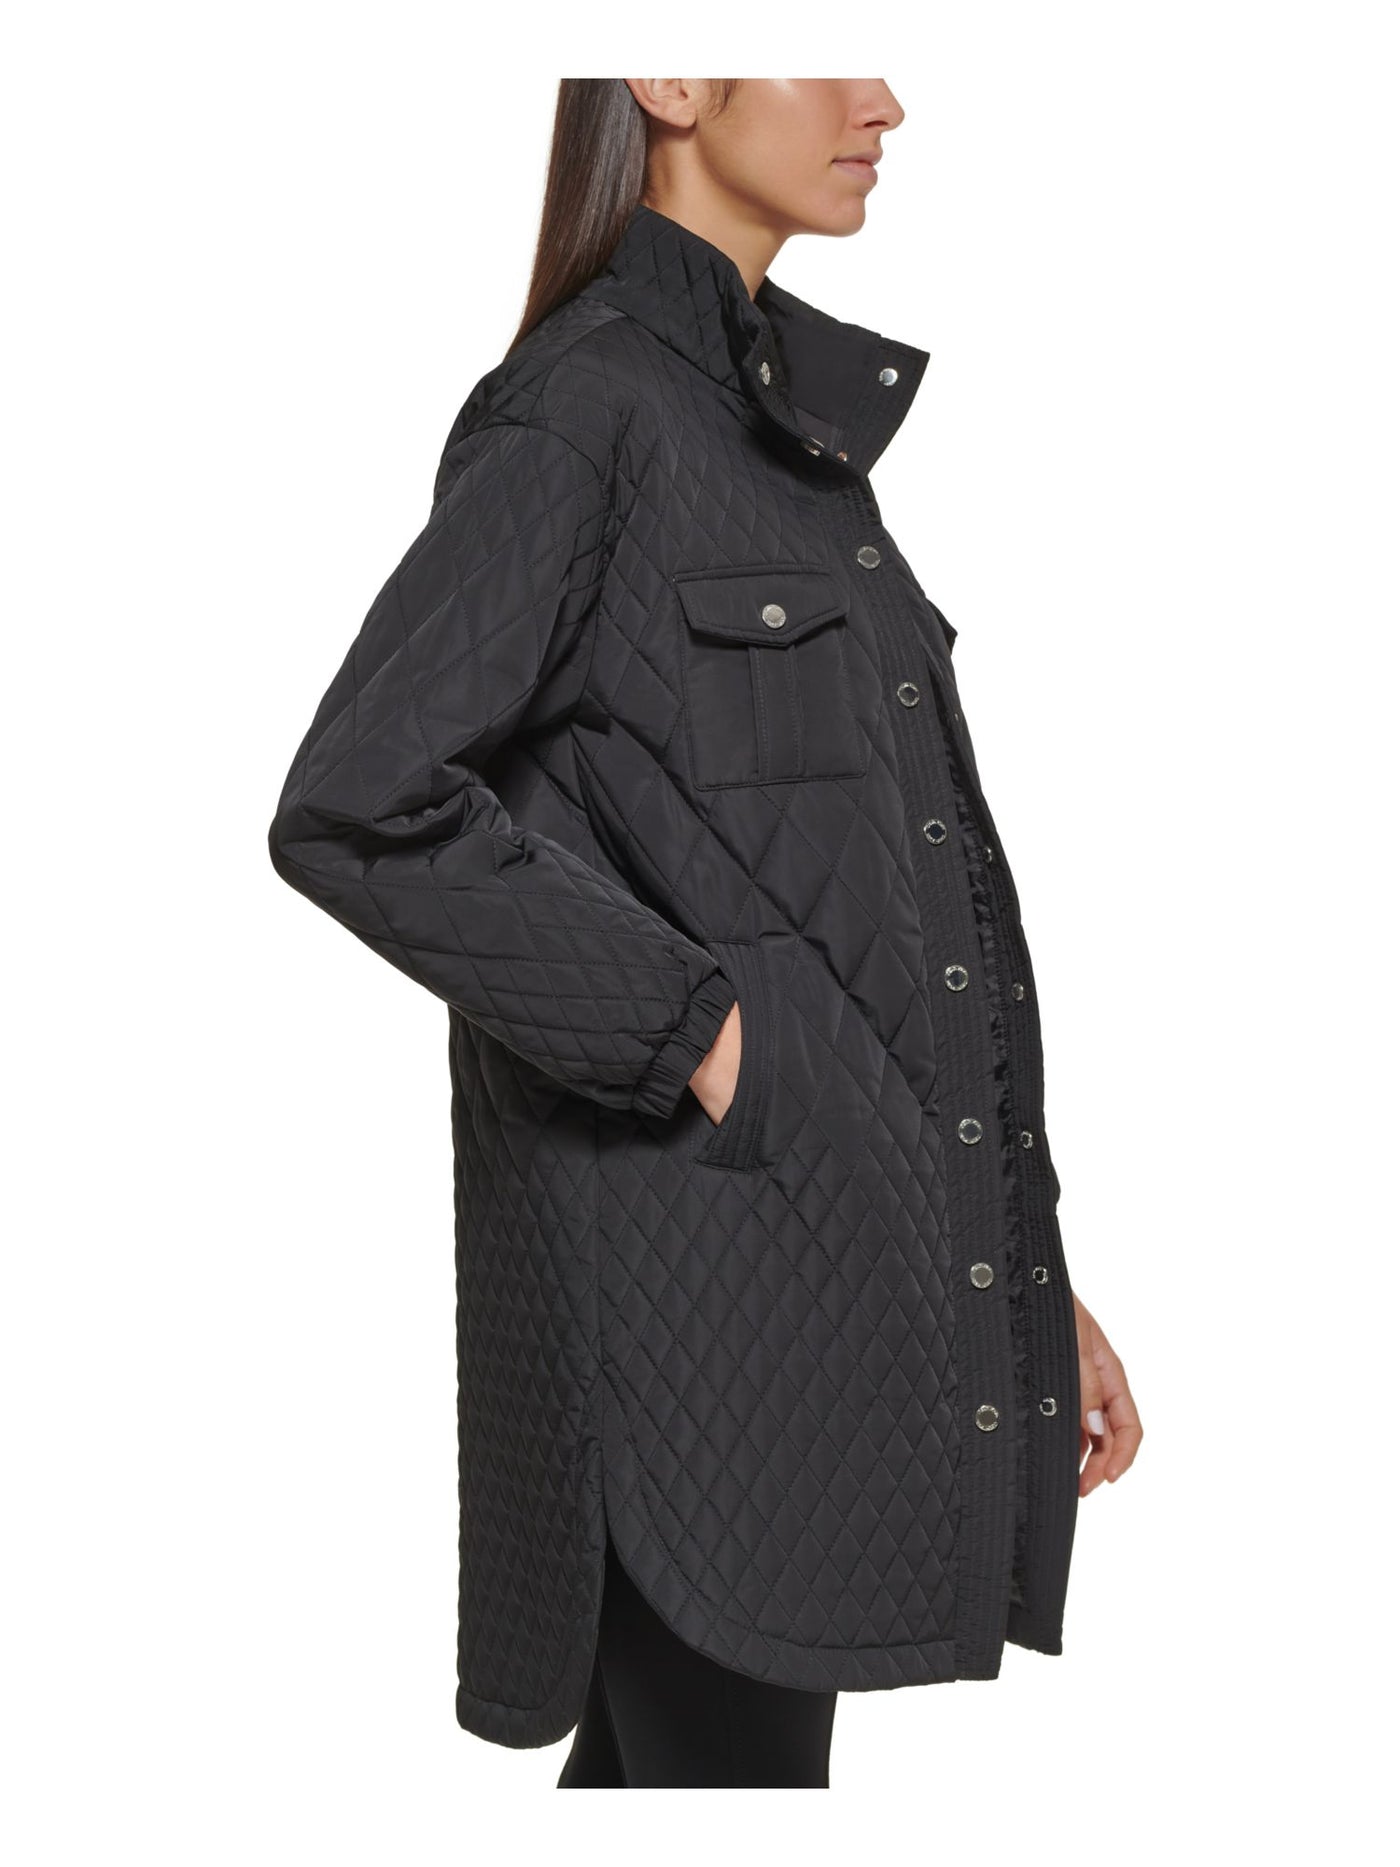 CALVIN KLEIN Womens Black Pocketed Snap Front Curved Hem Lined Quilted Jacket L